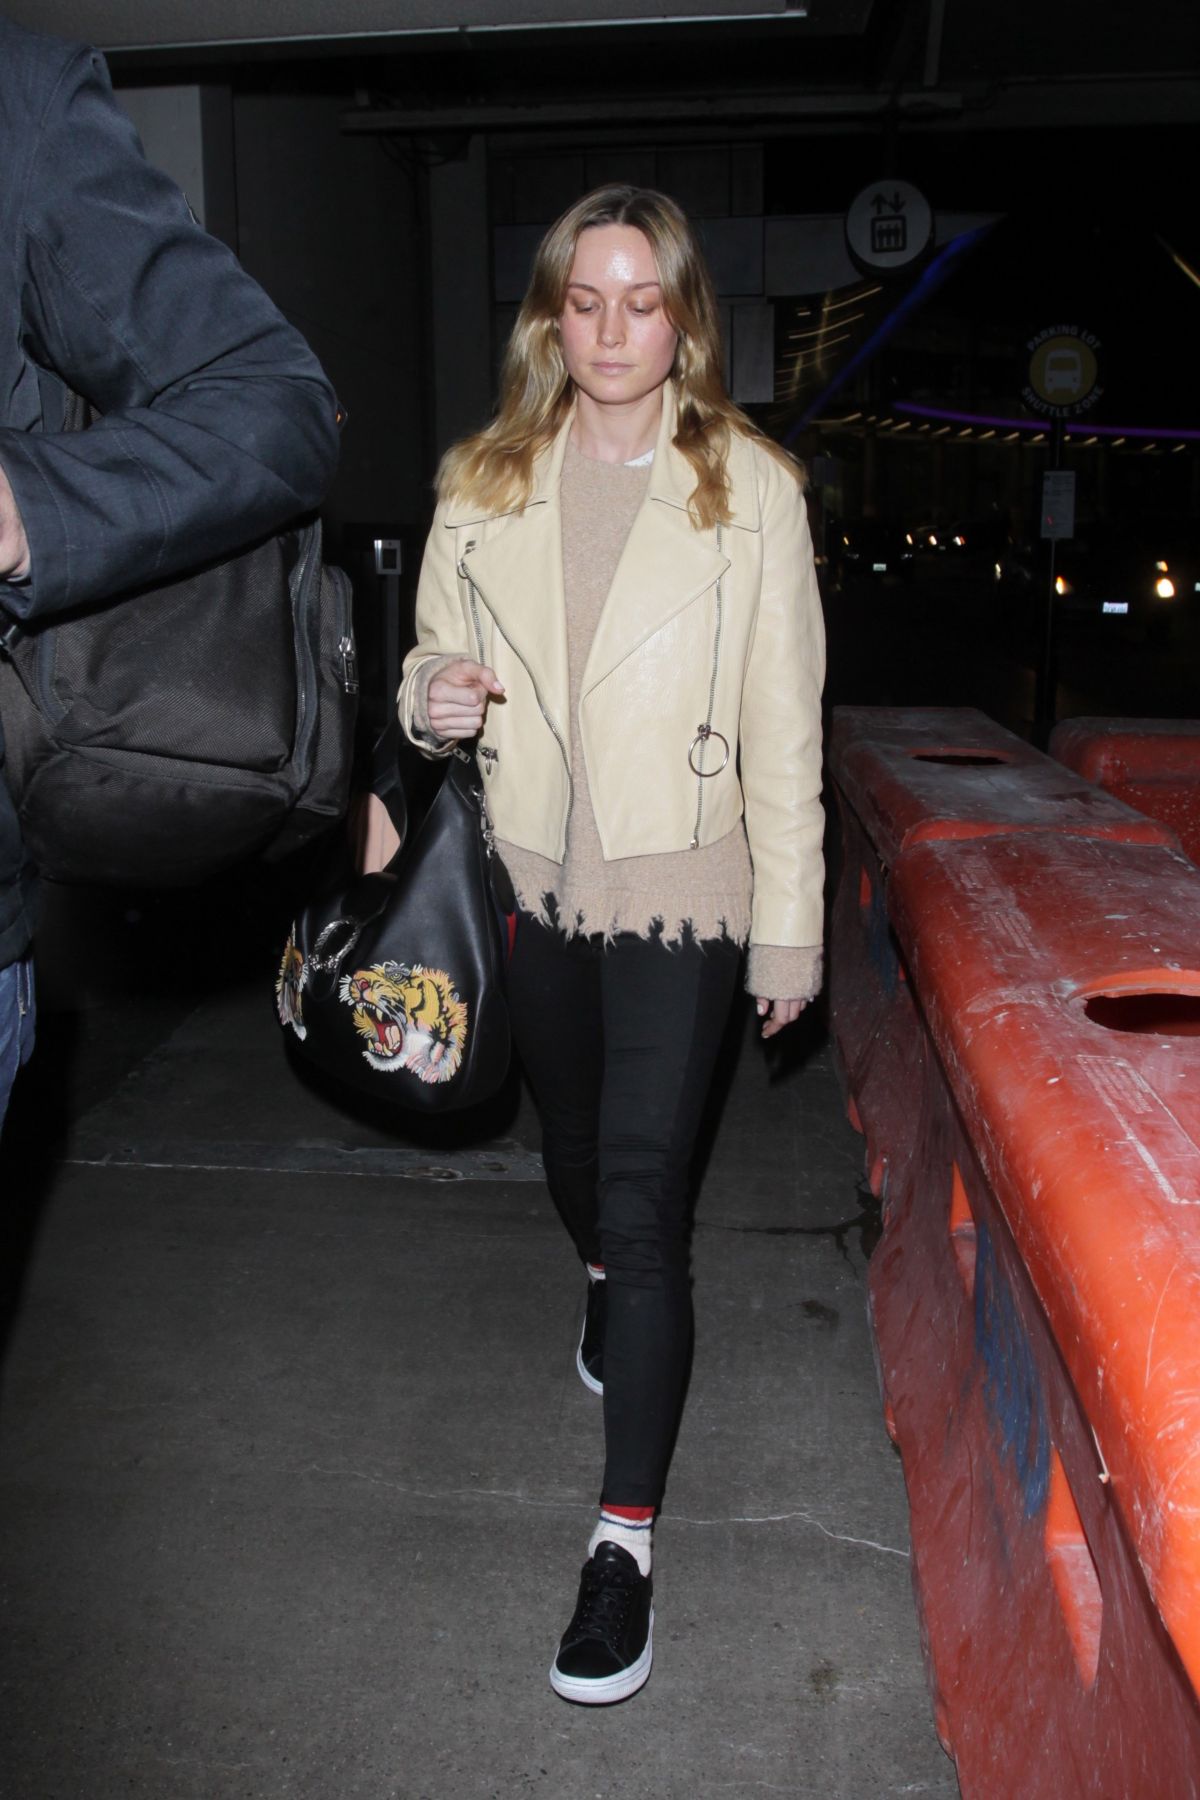 BRIE LARSON at LAX Airport in Los Angeles 03/07/2017 – HawtCelebs